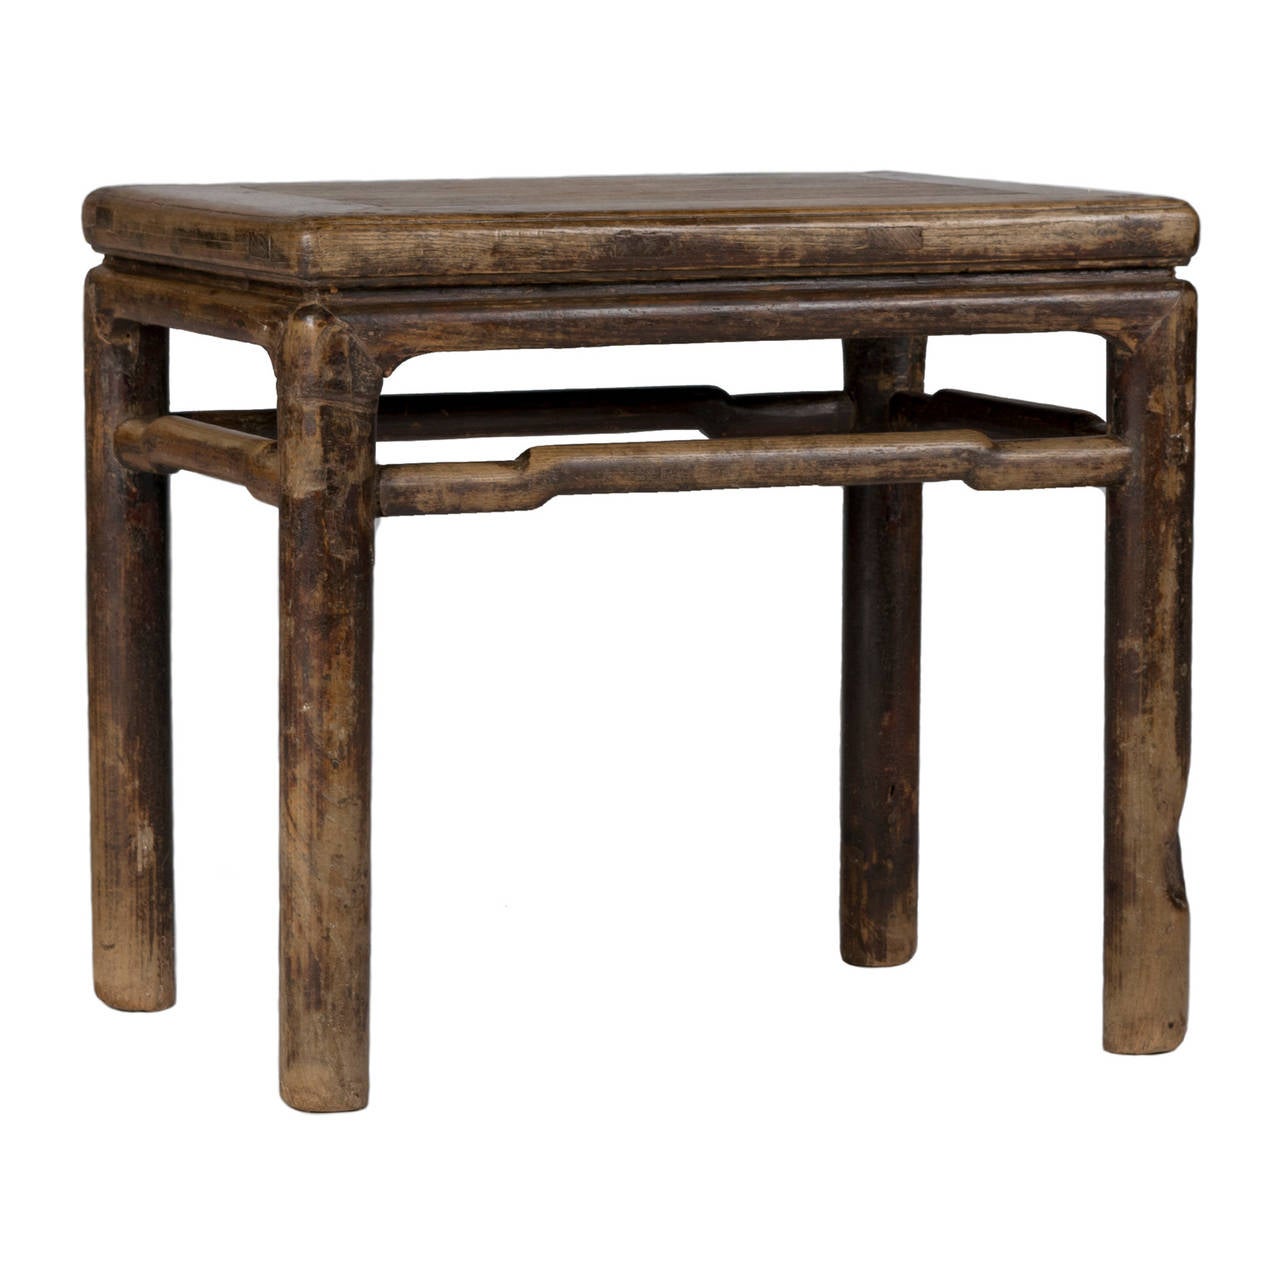 Elmwood round Ming leg half stool with recessed waist and humpback stretchers.